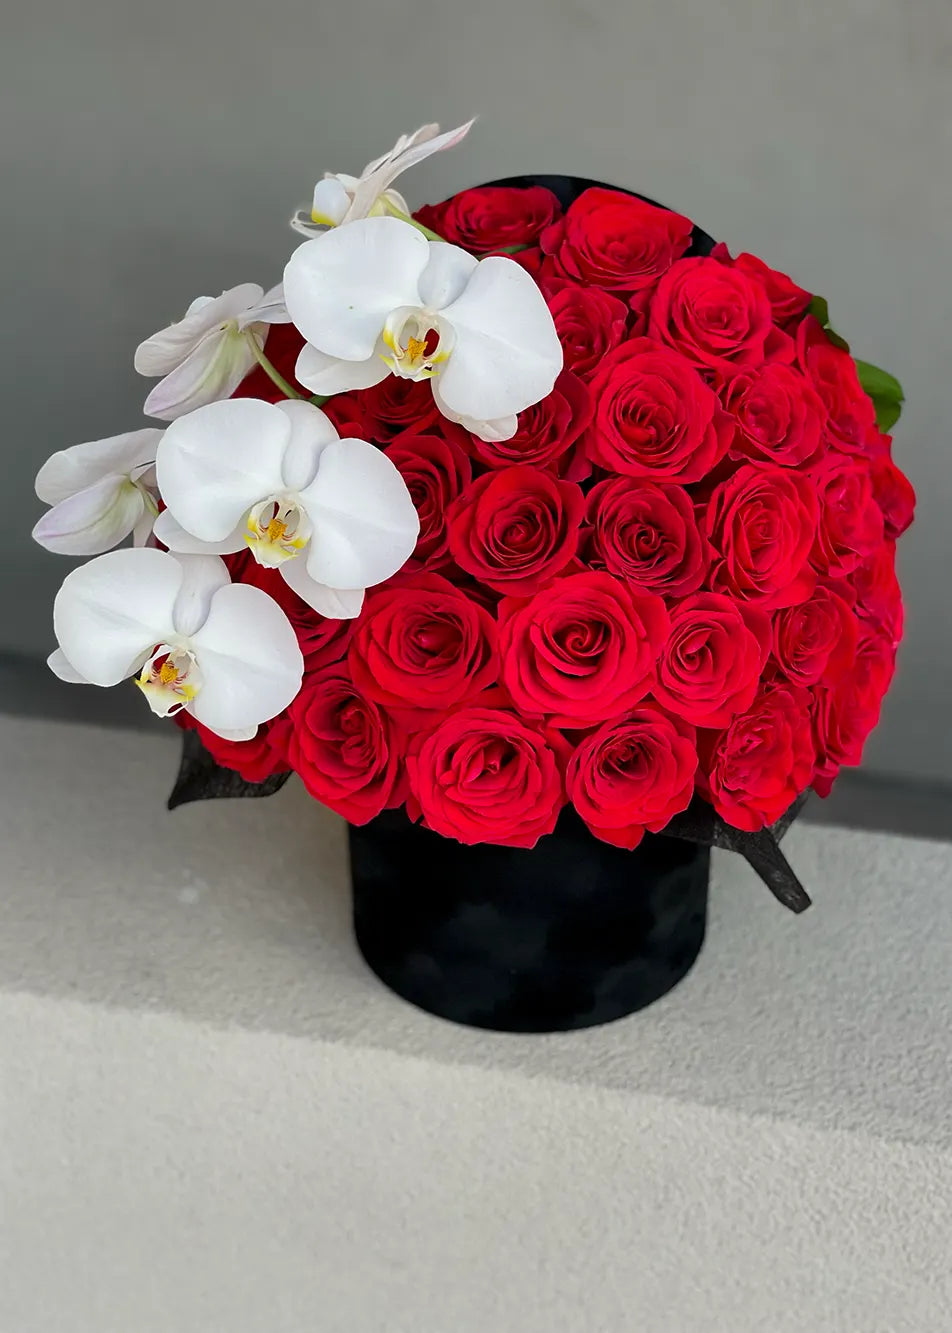 NO. 21. Red Roses with Orchid